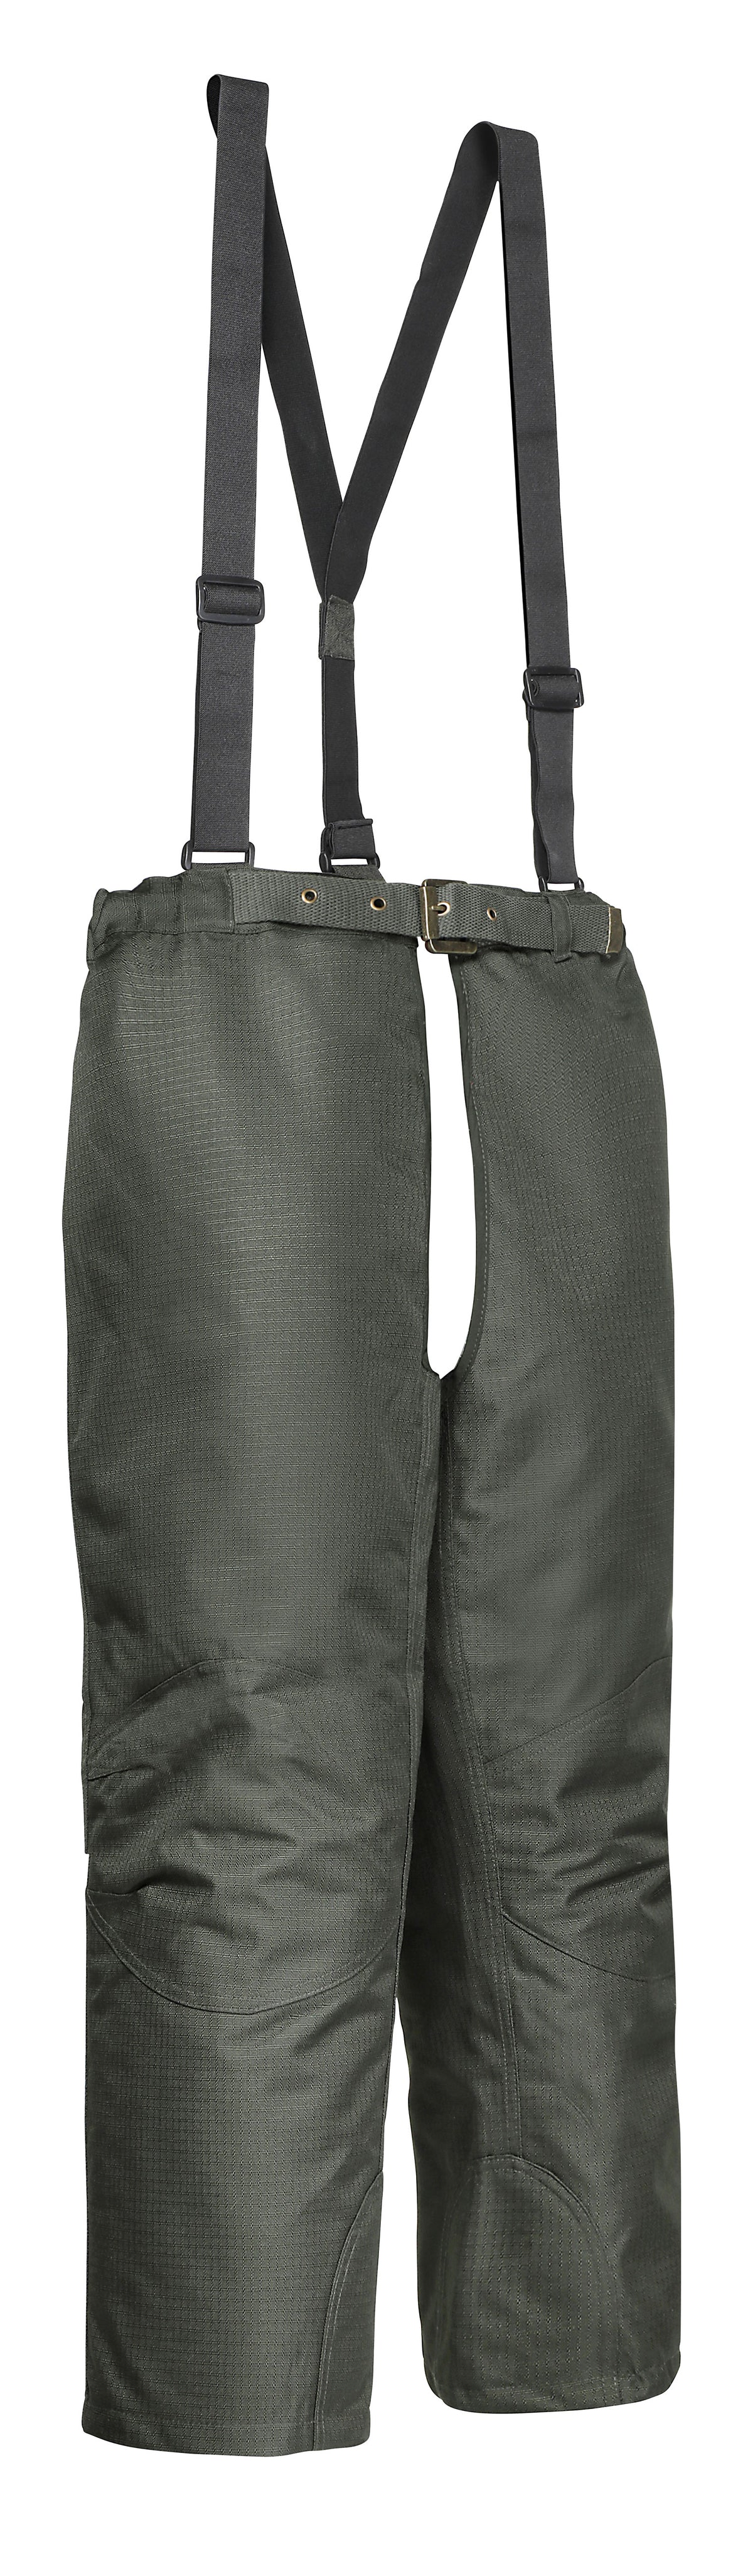 Percussion Stronger Waterproof Chaps with Braces - Hollands Country Clothing